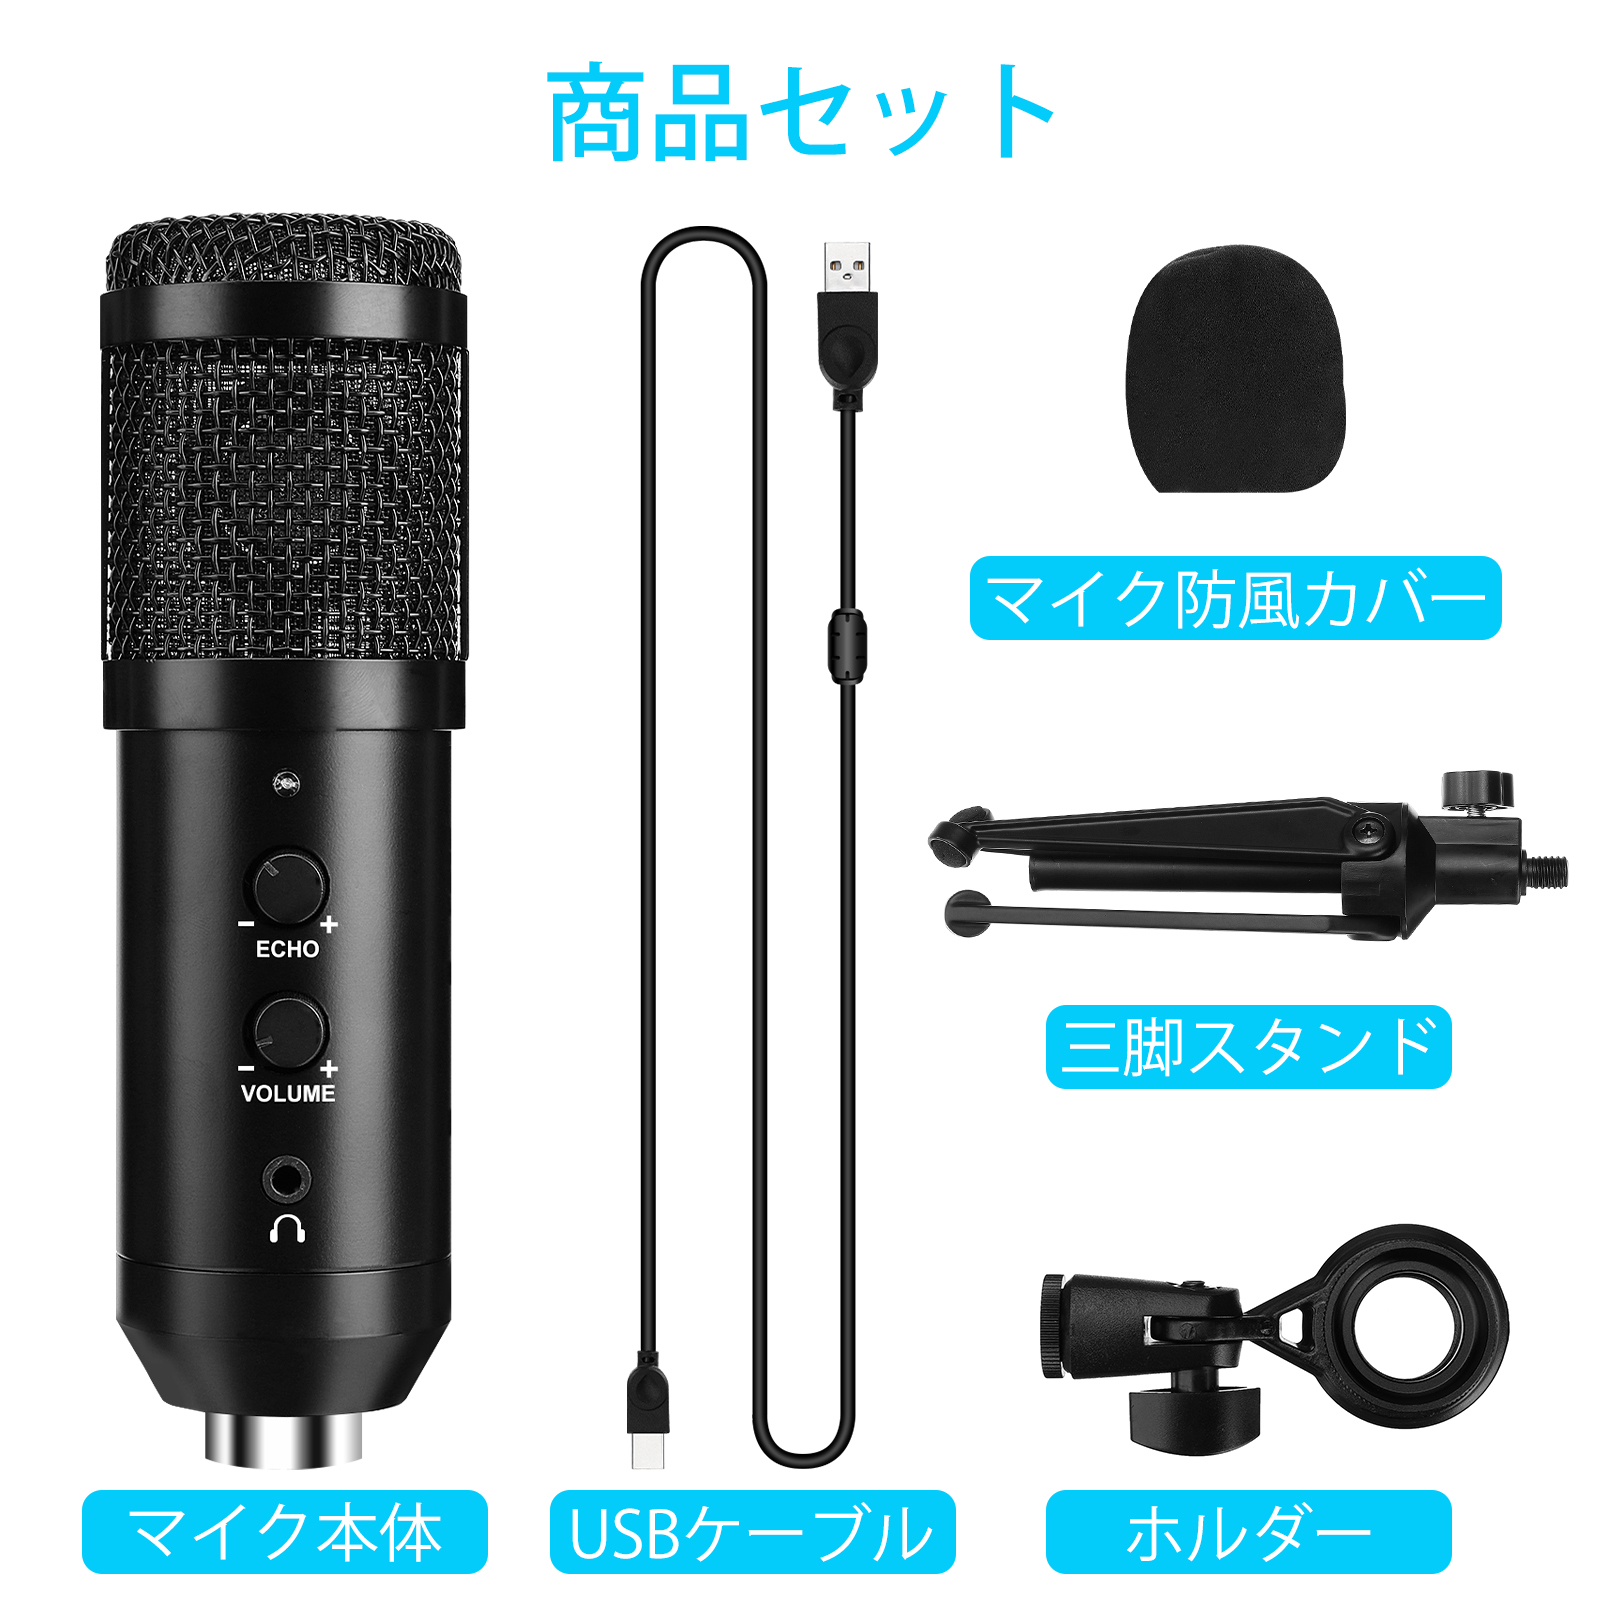 USB Microphone Professional Condenser Microphones For PC Computer Laptop Recording Studio Singing Gaming